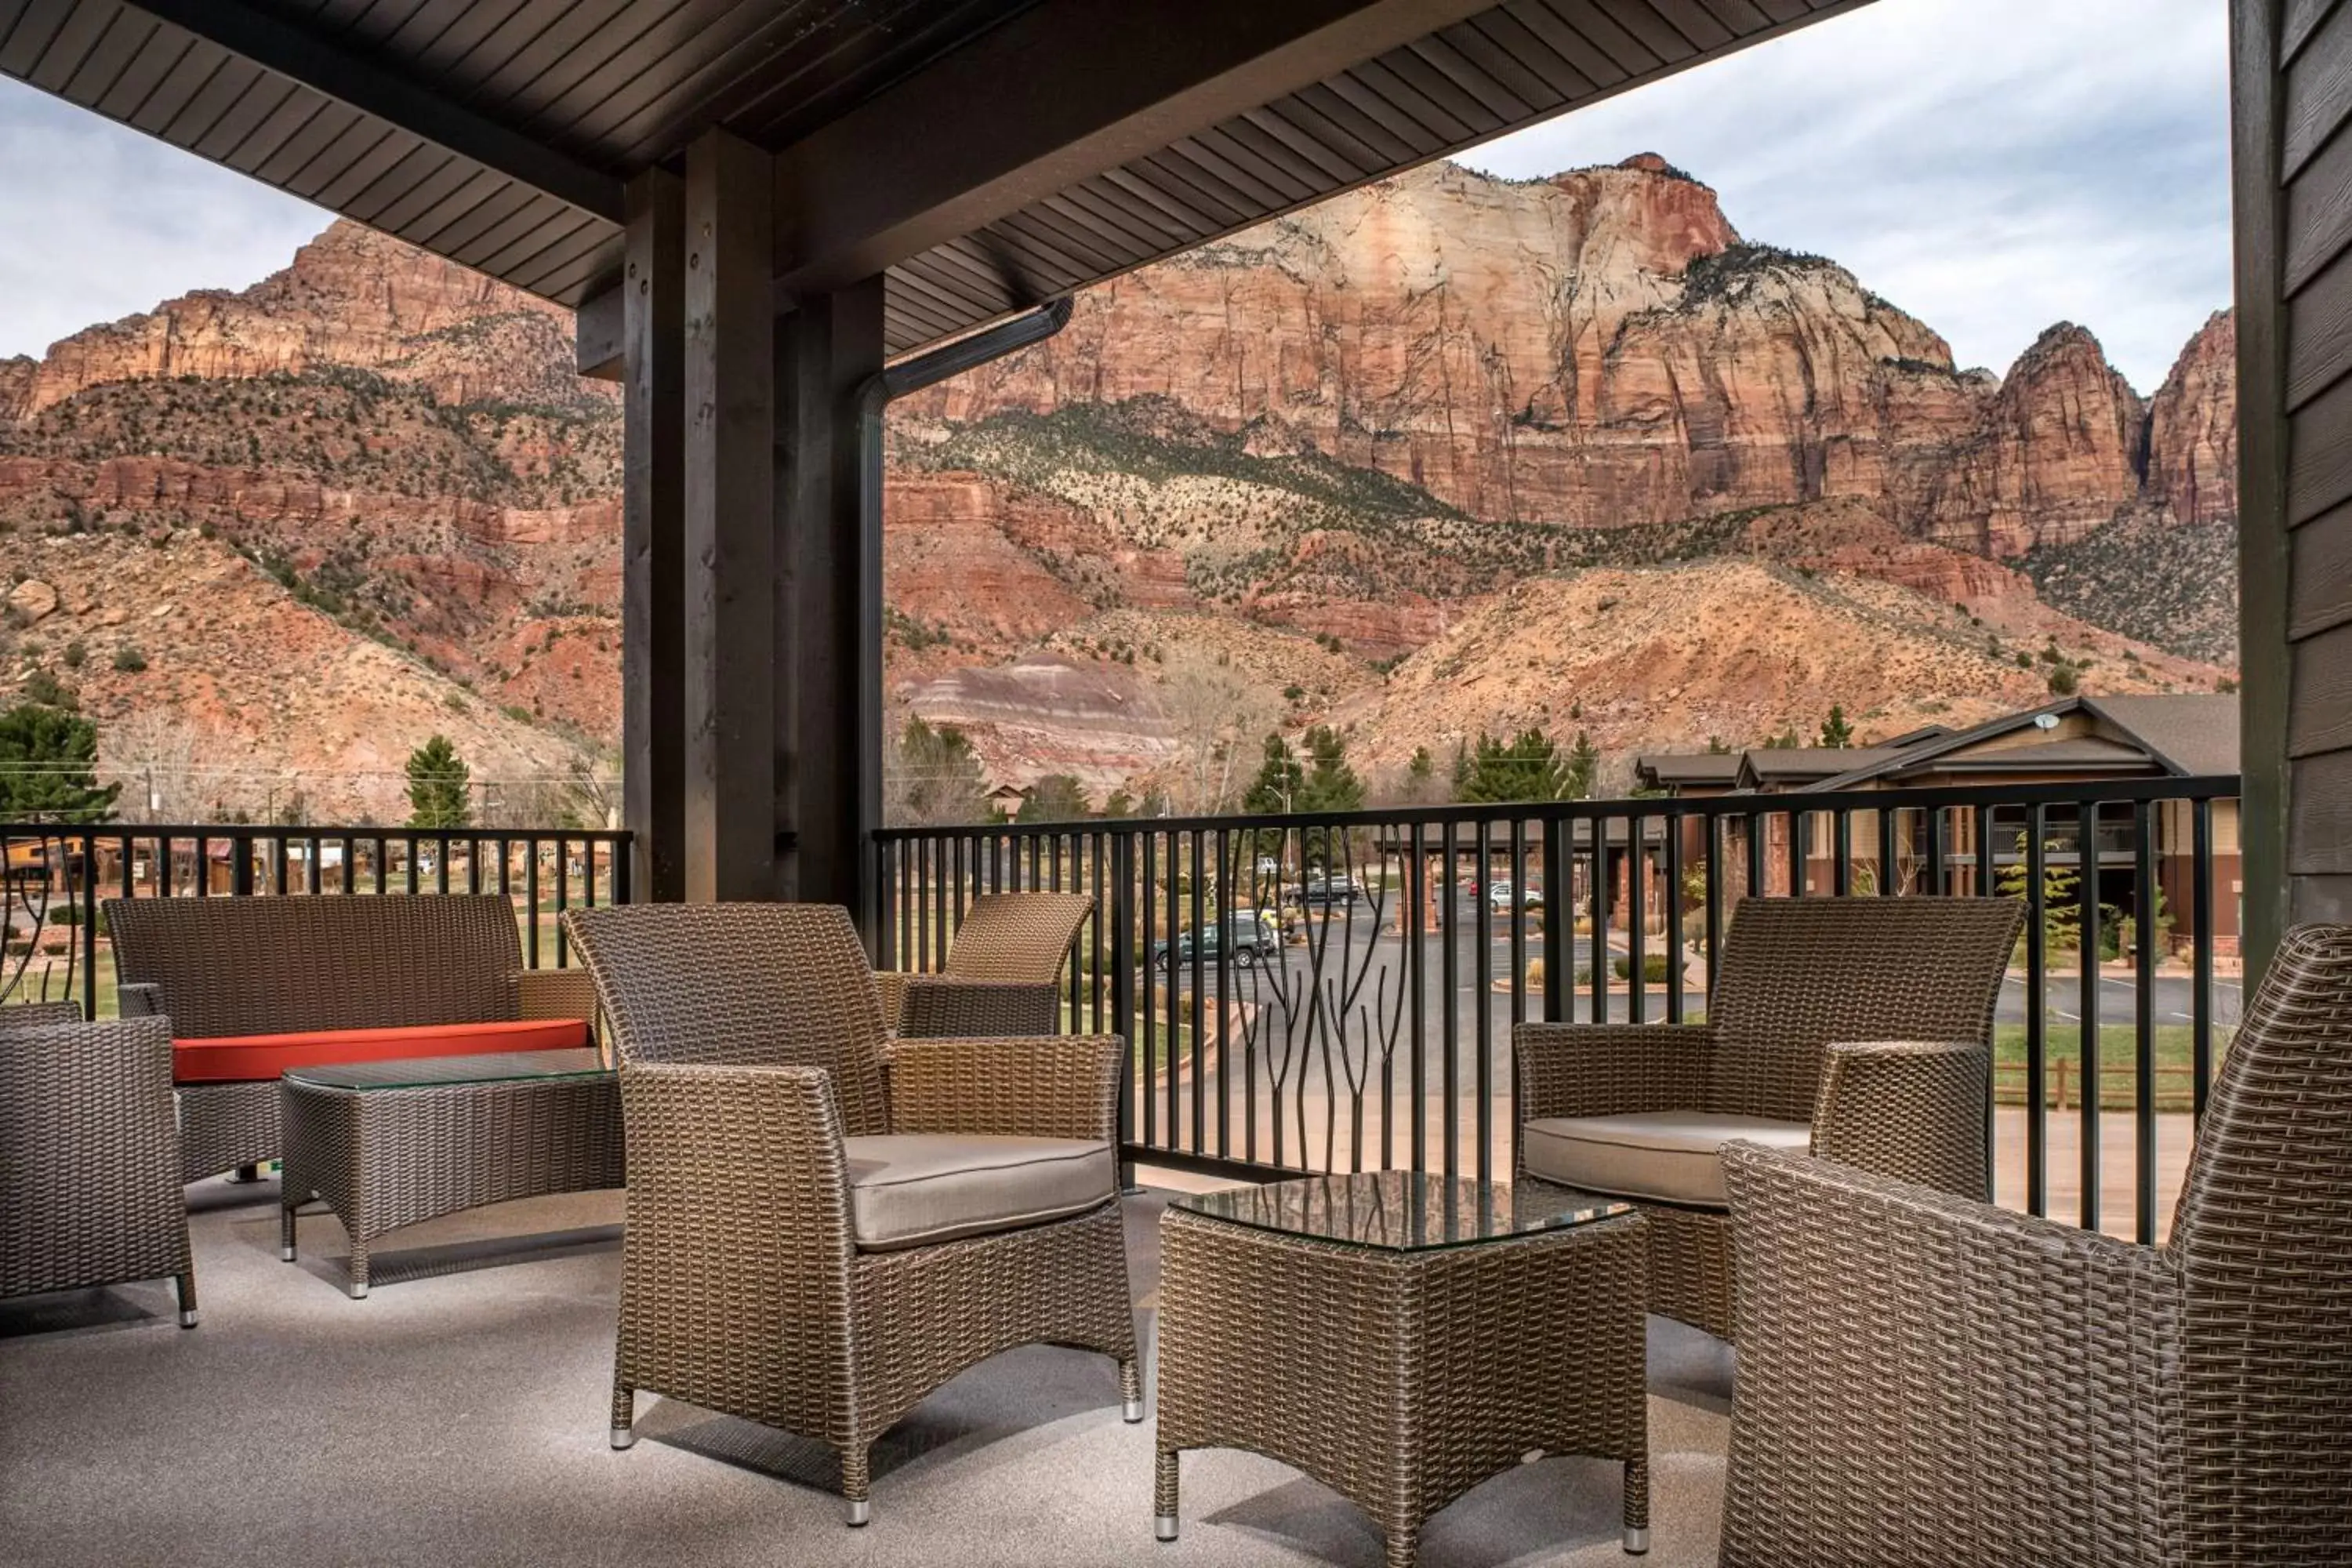 Property building in SpringHill Suites by Marriott Springdale Zion National Park